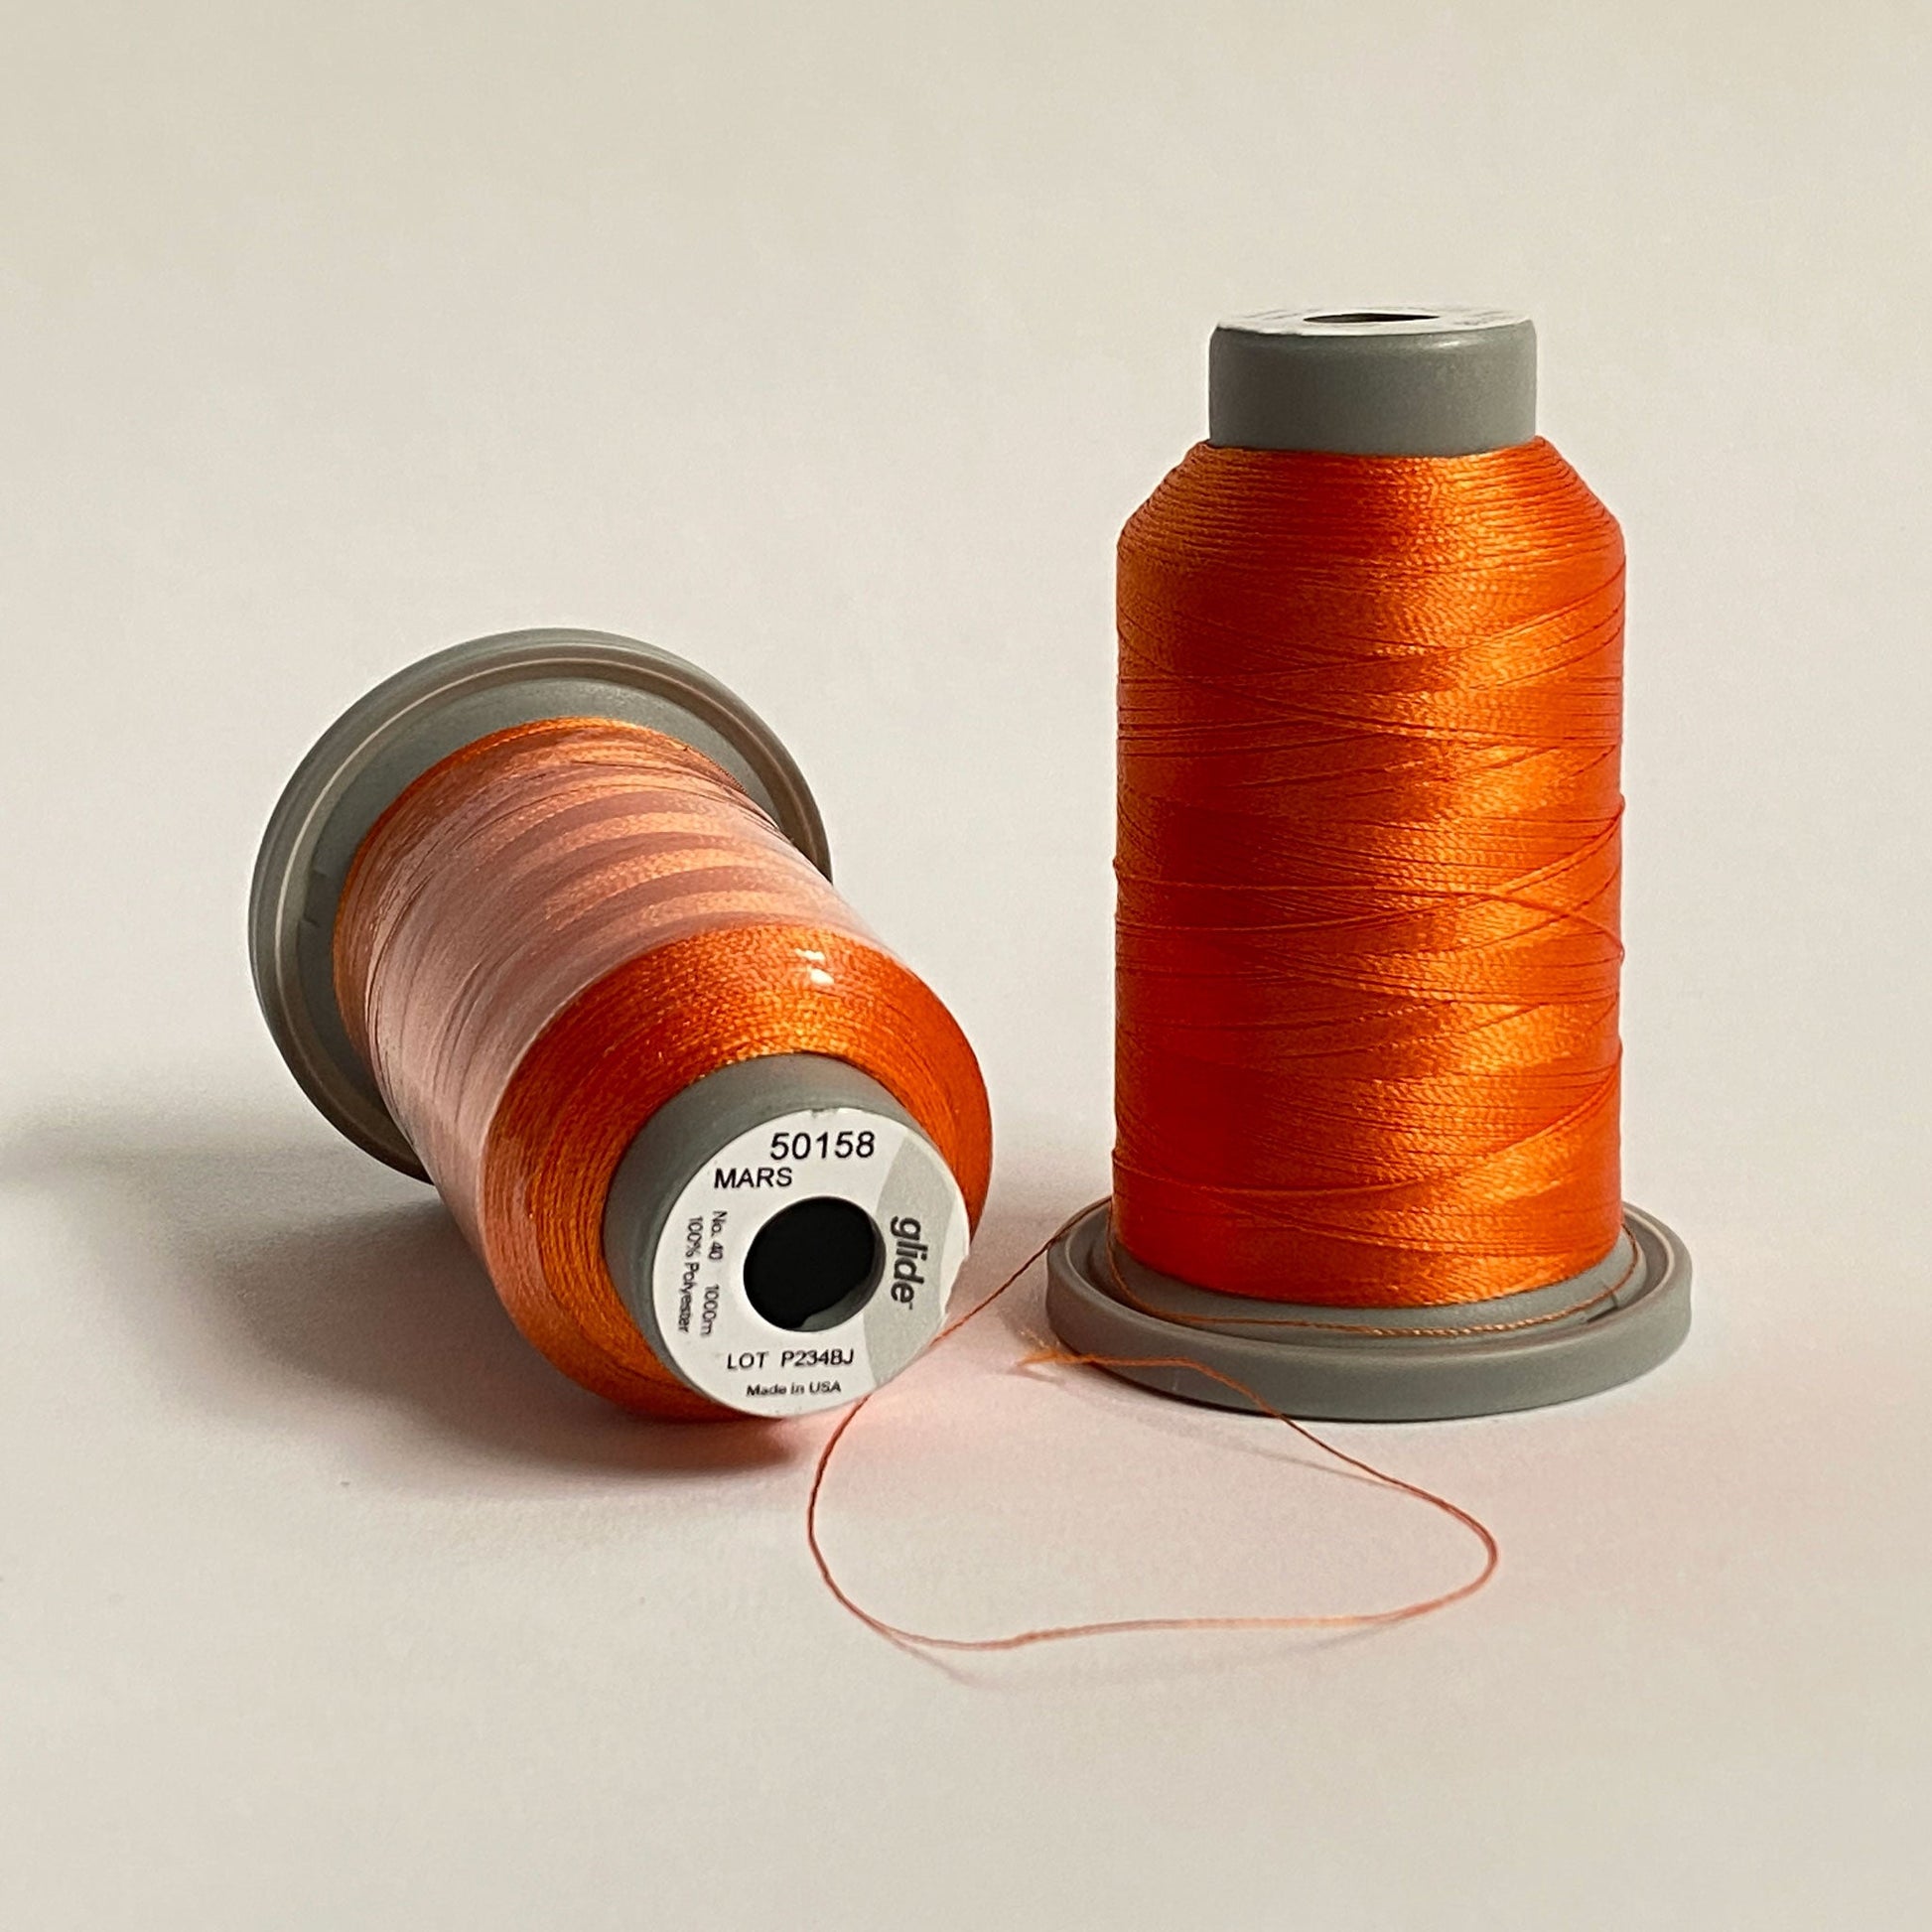 Glide 40 wt Trilobal Polyester thread by Fil-Tec has a slight sheen and excellent coverage, making it the perfect choice for thread-painting and embroidery. The Mars (50158) color is a bright shade of orange, but not flourescent. Stitcher's Joy